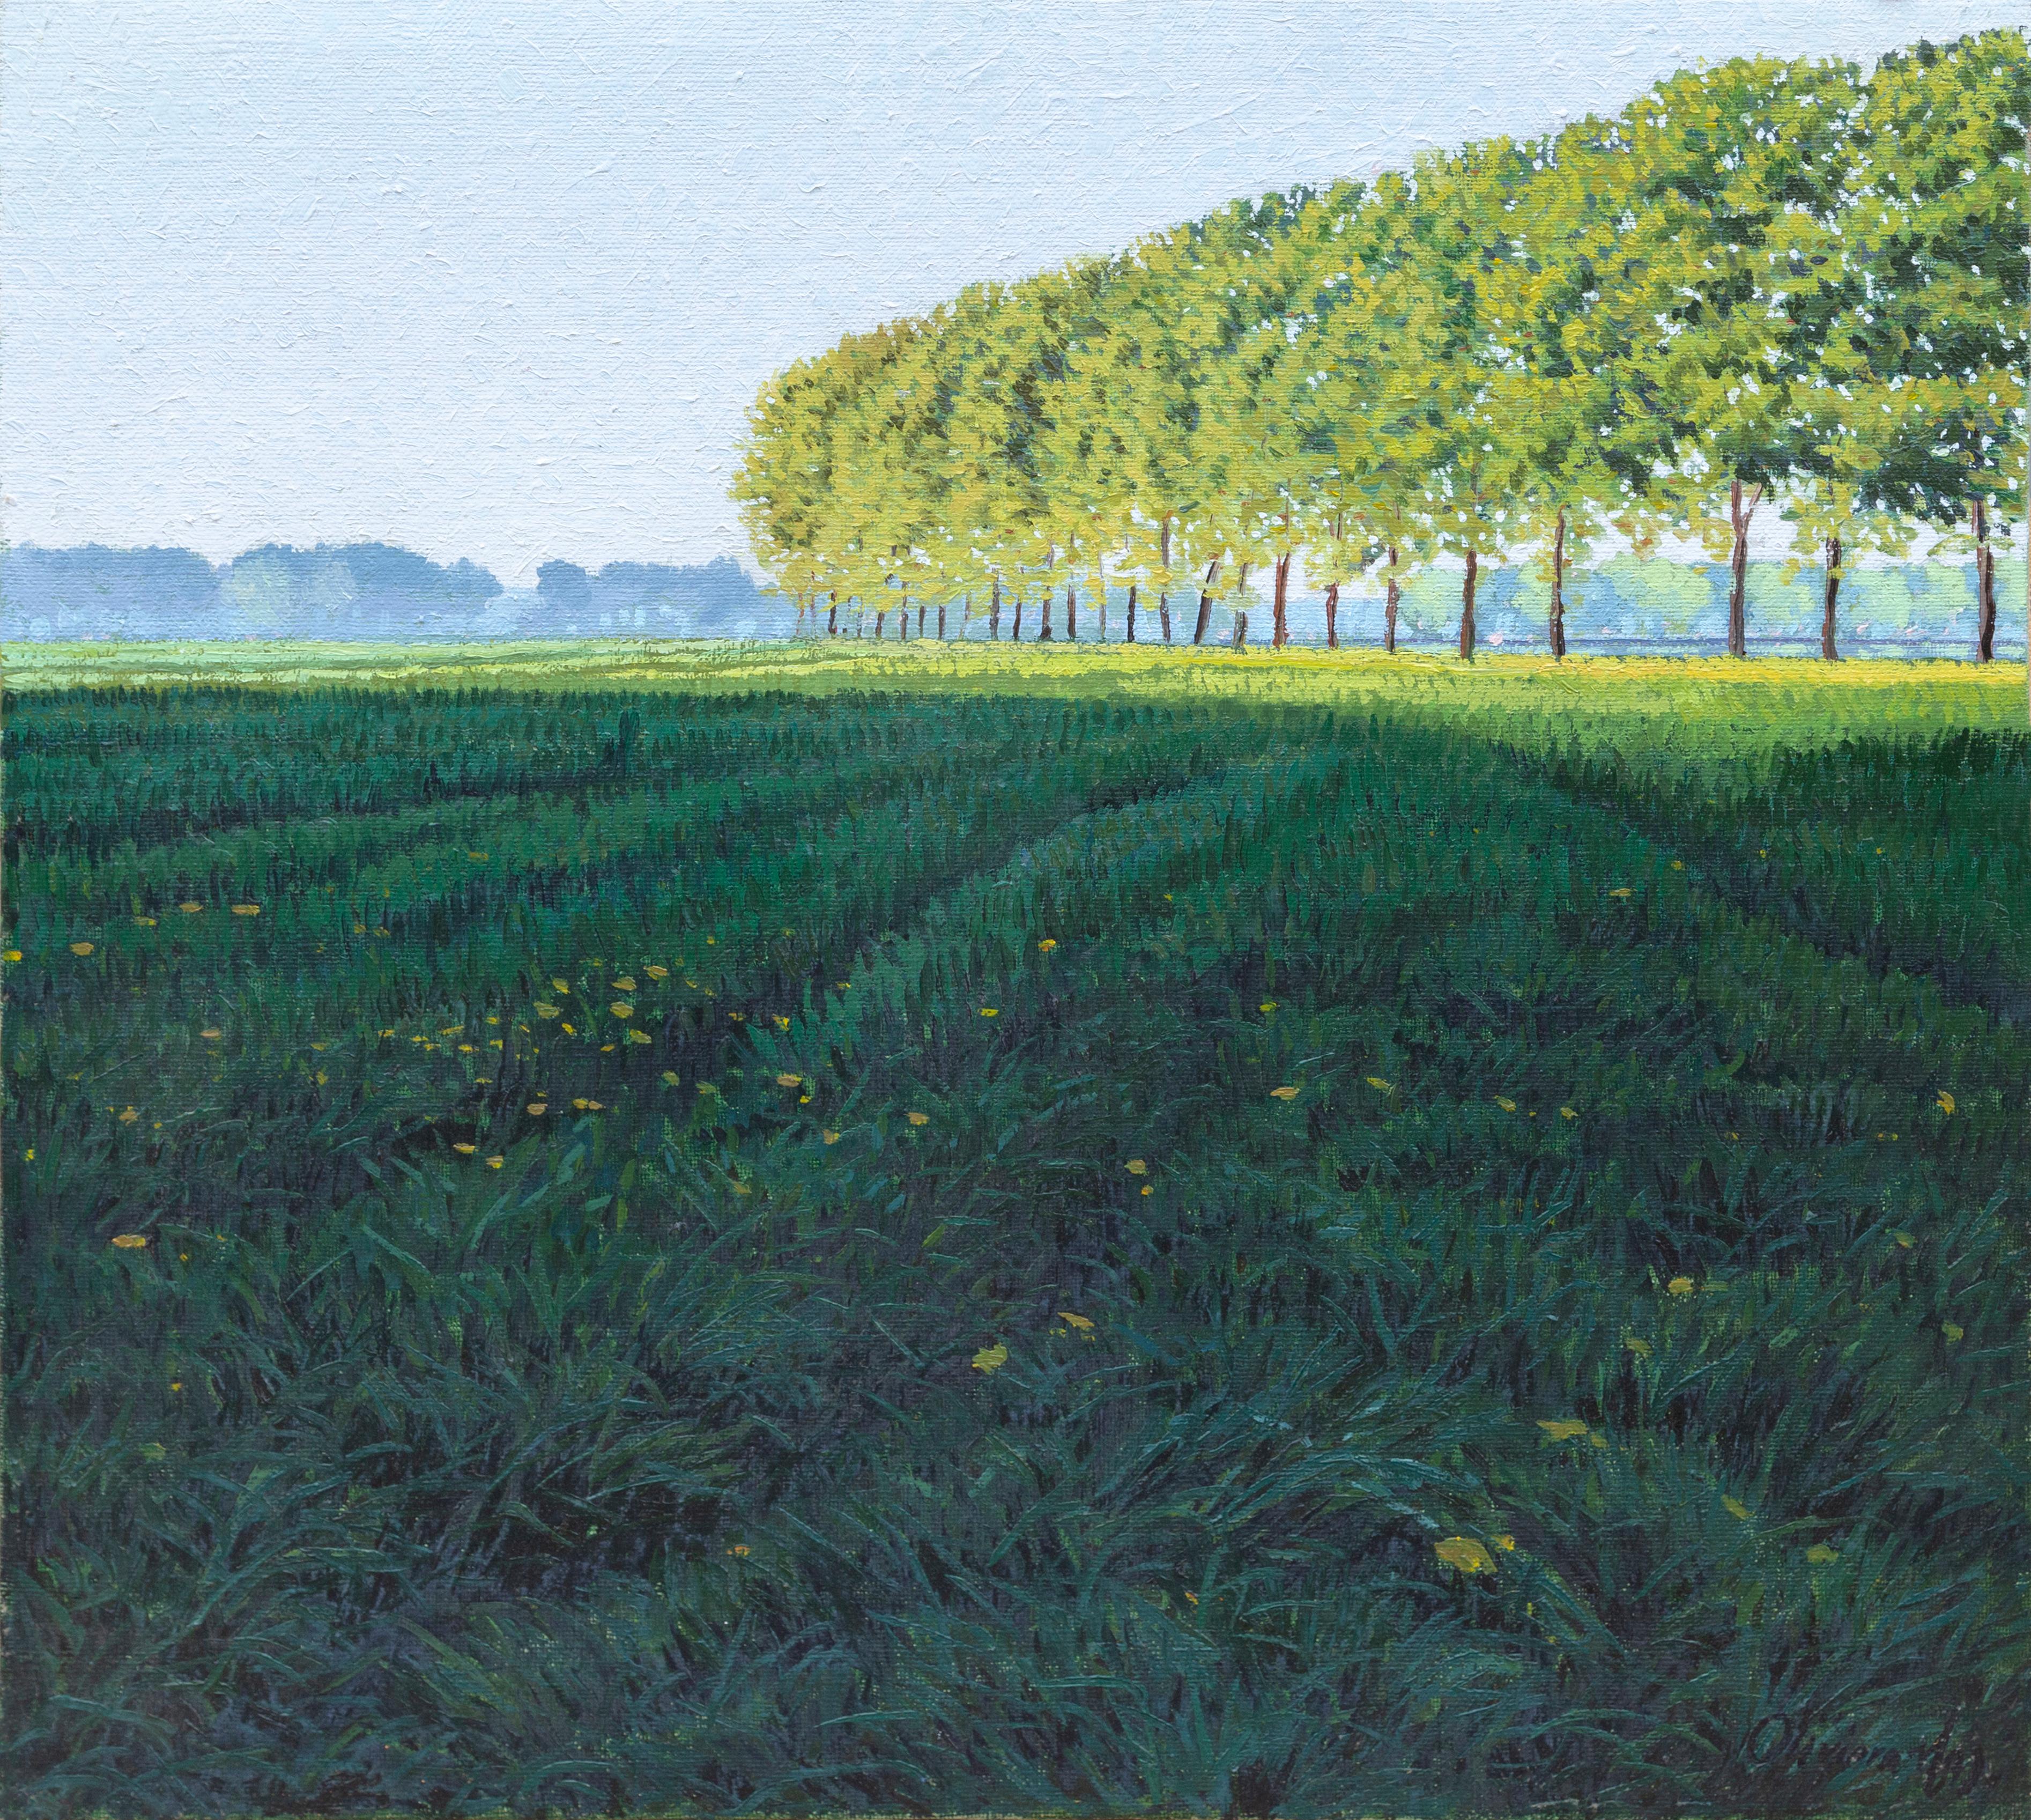 Oliviero Masi Landscape Painting - Ombre Lunghe in Risaia (Long Shadows in Paddy Field), Oil Painting